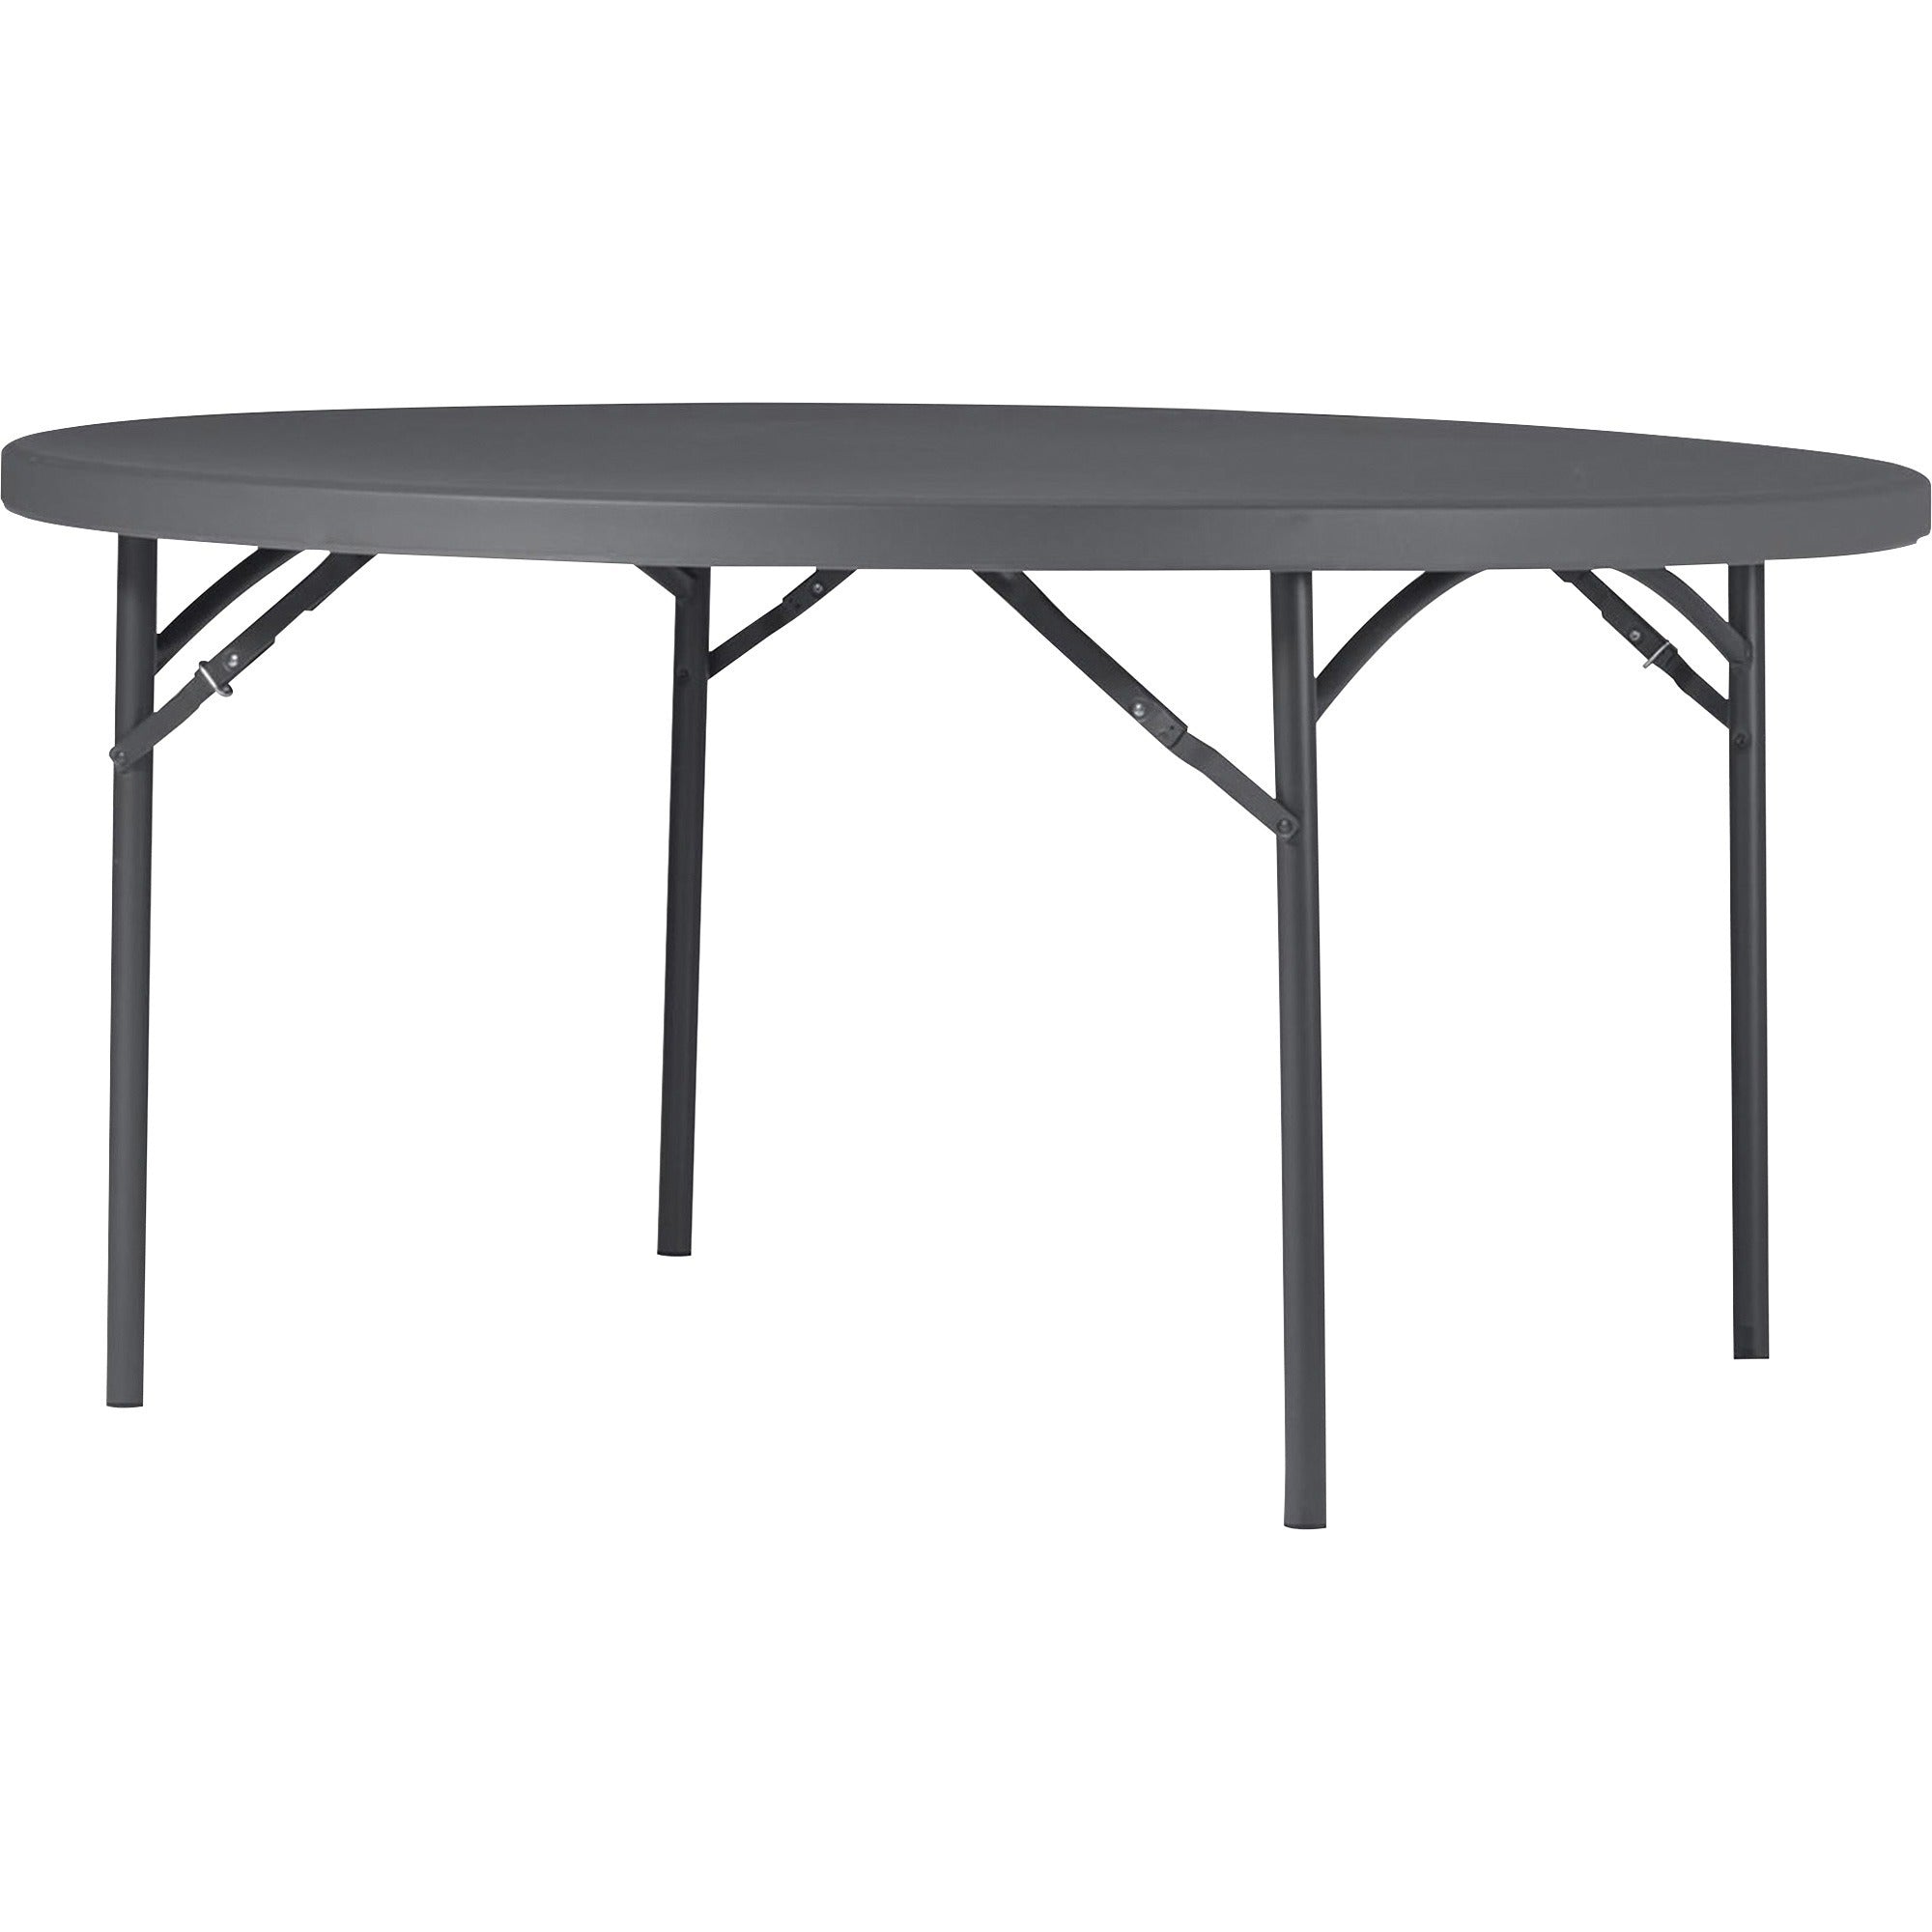 Dorel Zown Commercial Round Blow Mold Fold Table - For - Table TopRound Top - 4 Legs - 750 lb Capacity x 60" Table Top Diameter - 29.20" Height - Gray - High-density Polyethylene (HDPE), Resin - 1 Each - 1